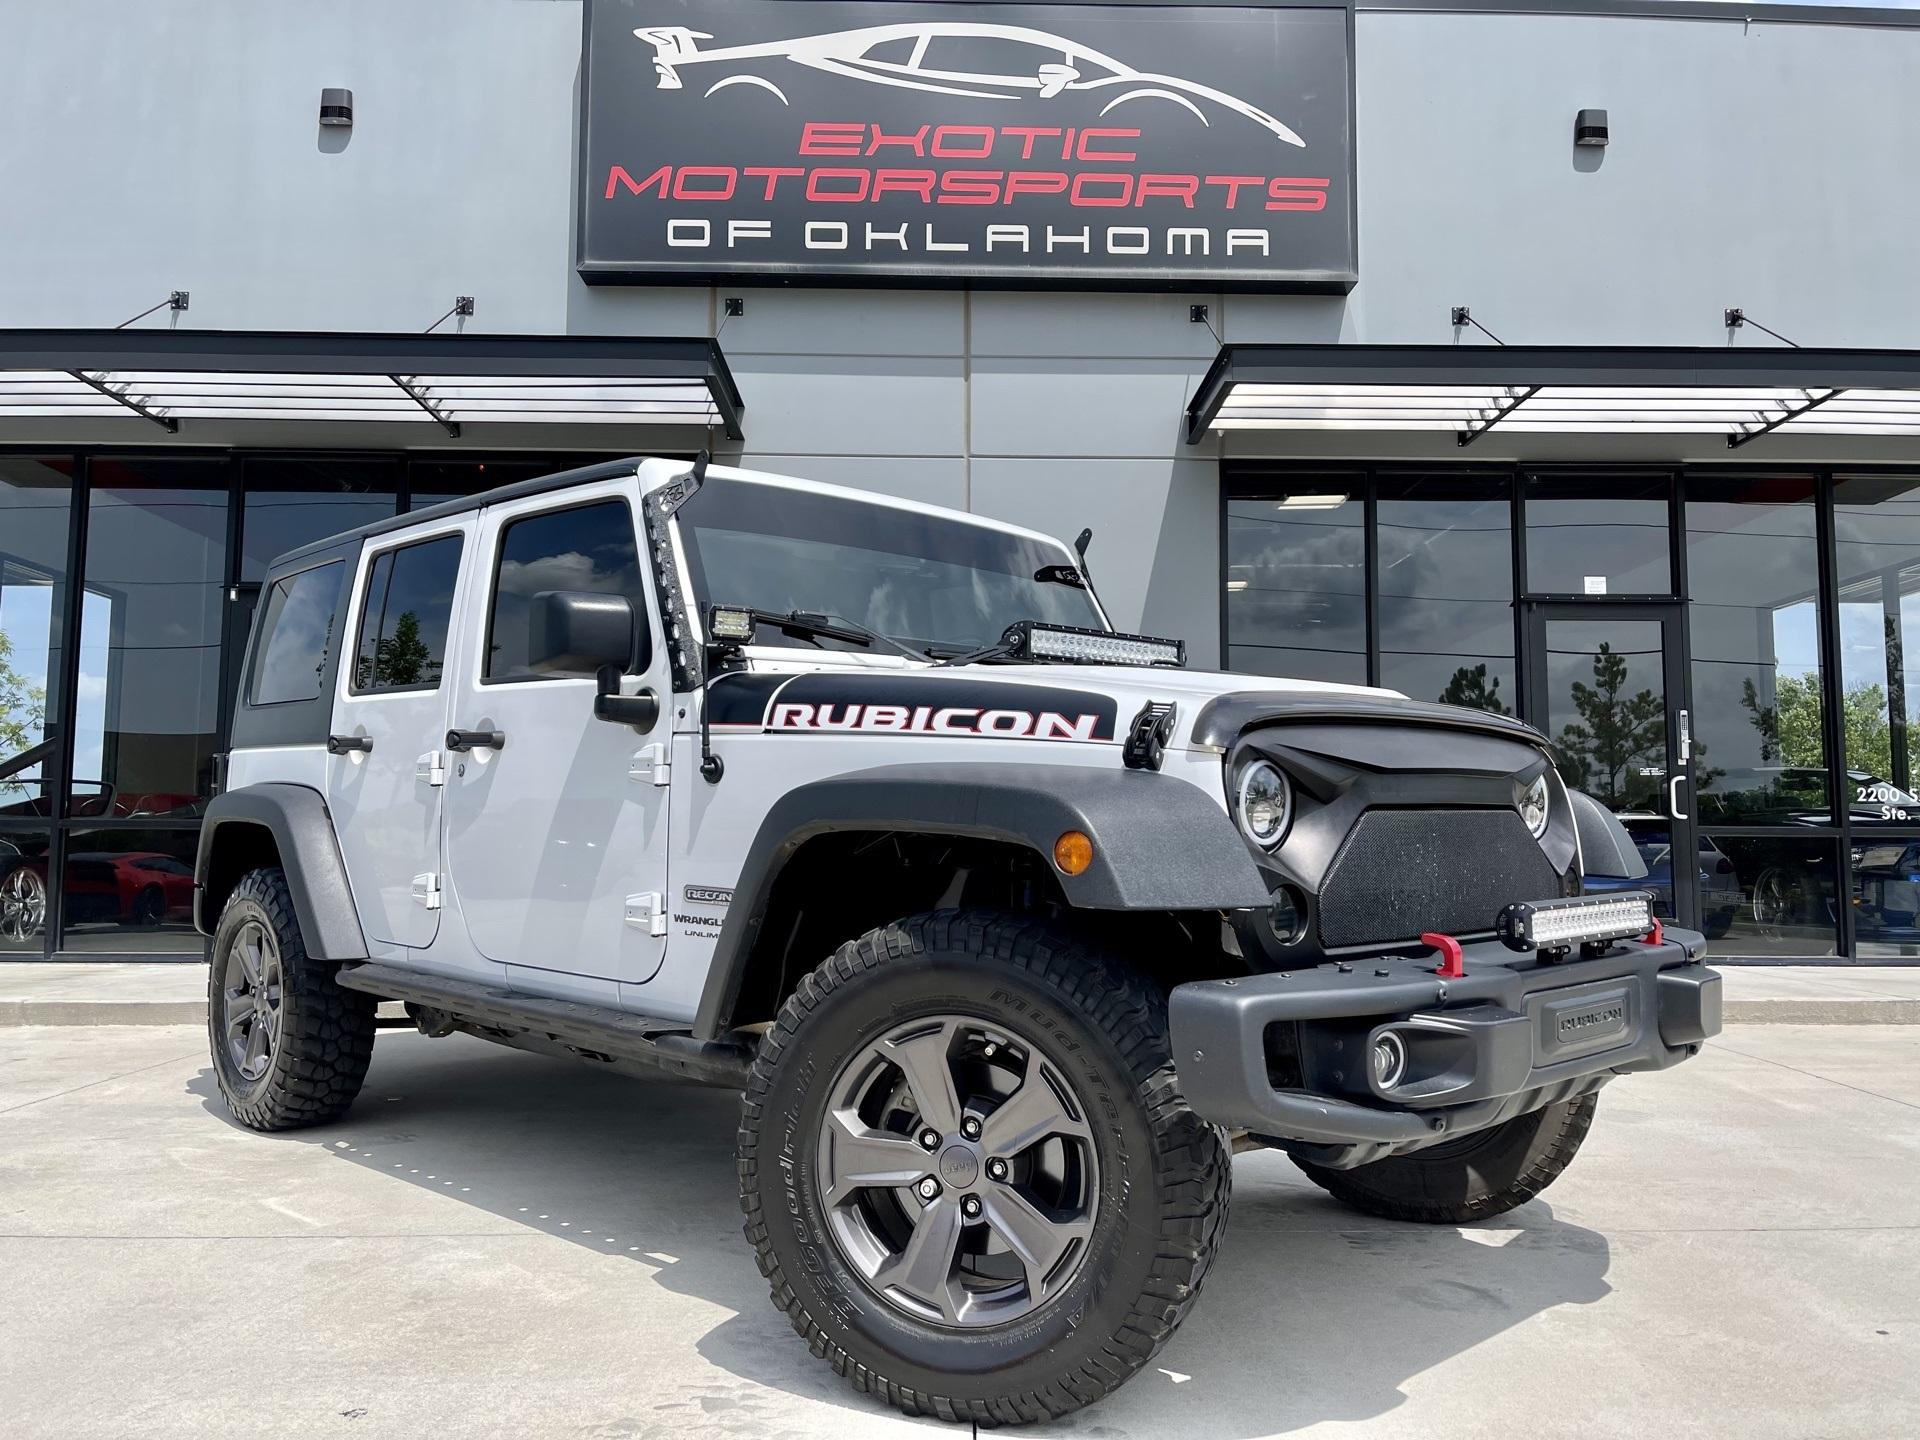 Used 2018 Jeep Wrangler JK Unlimited Rubicon For Sale (Sold) | Exotic  Motorsports of Oklahoma Stock #C638-1